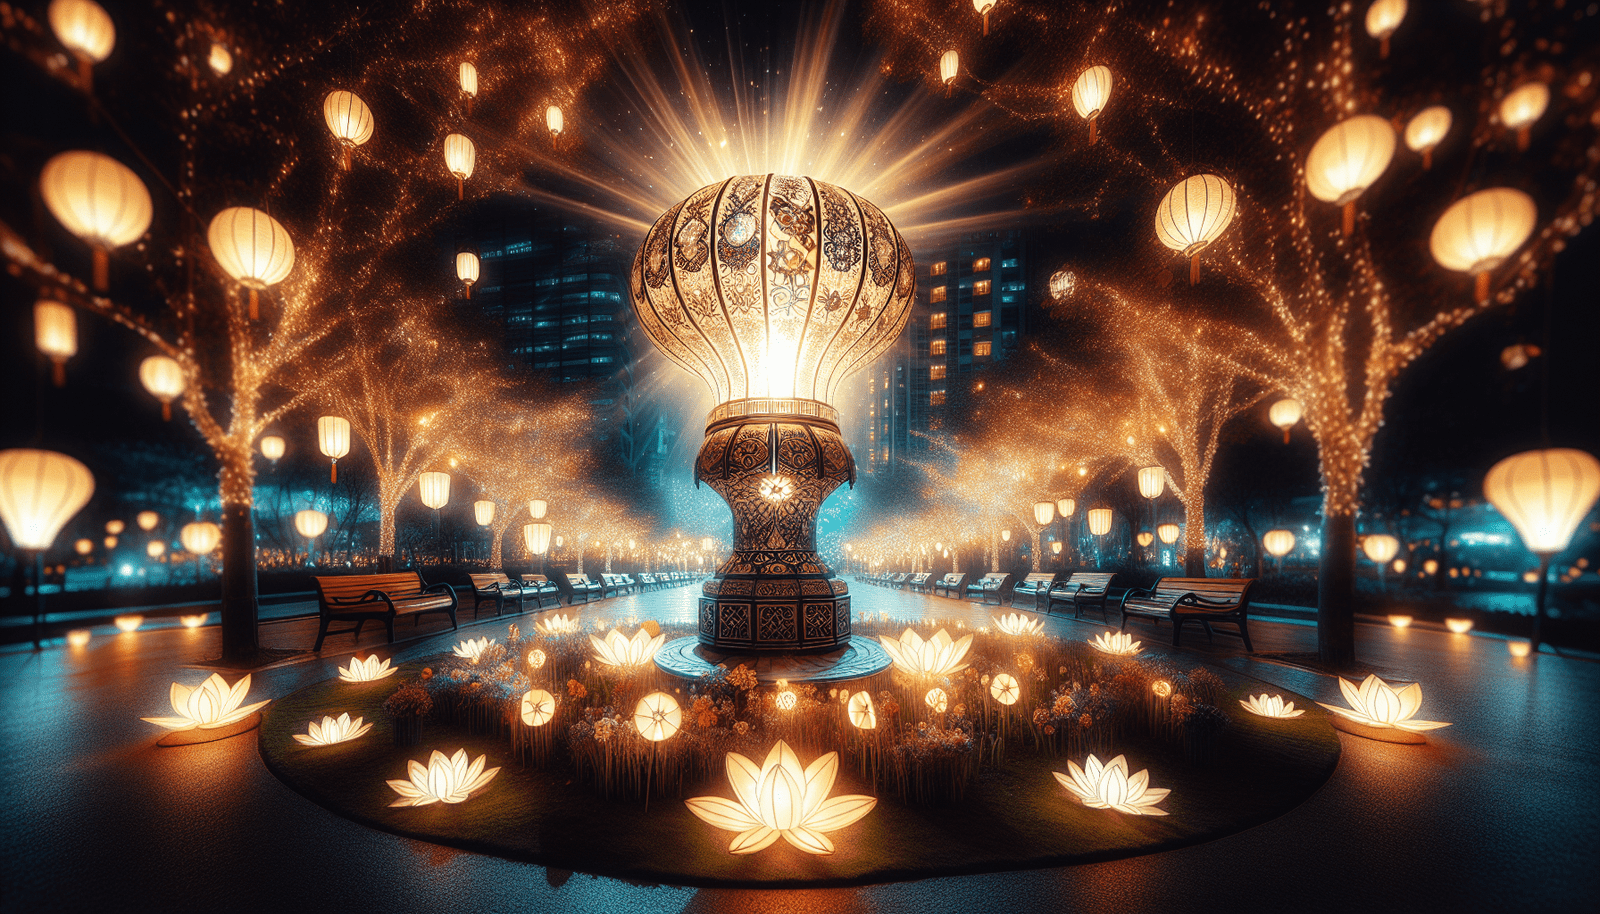 Experience The Lantern Festivals At Franklin Square